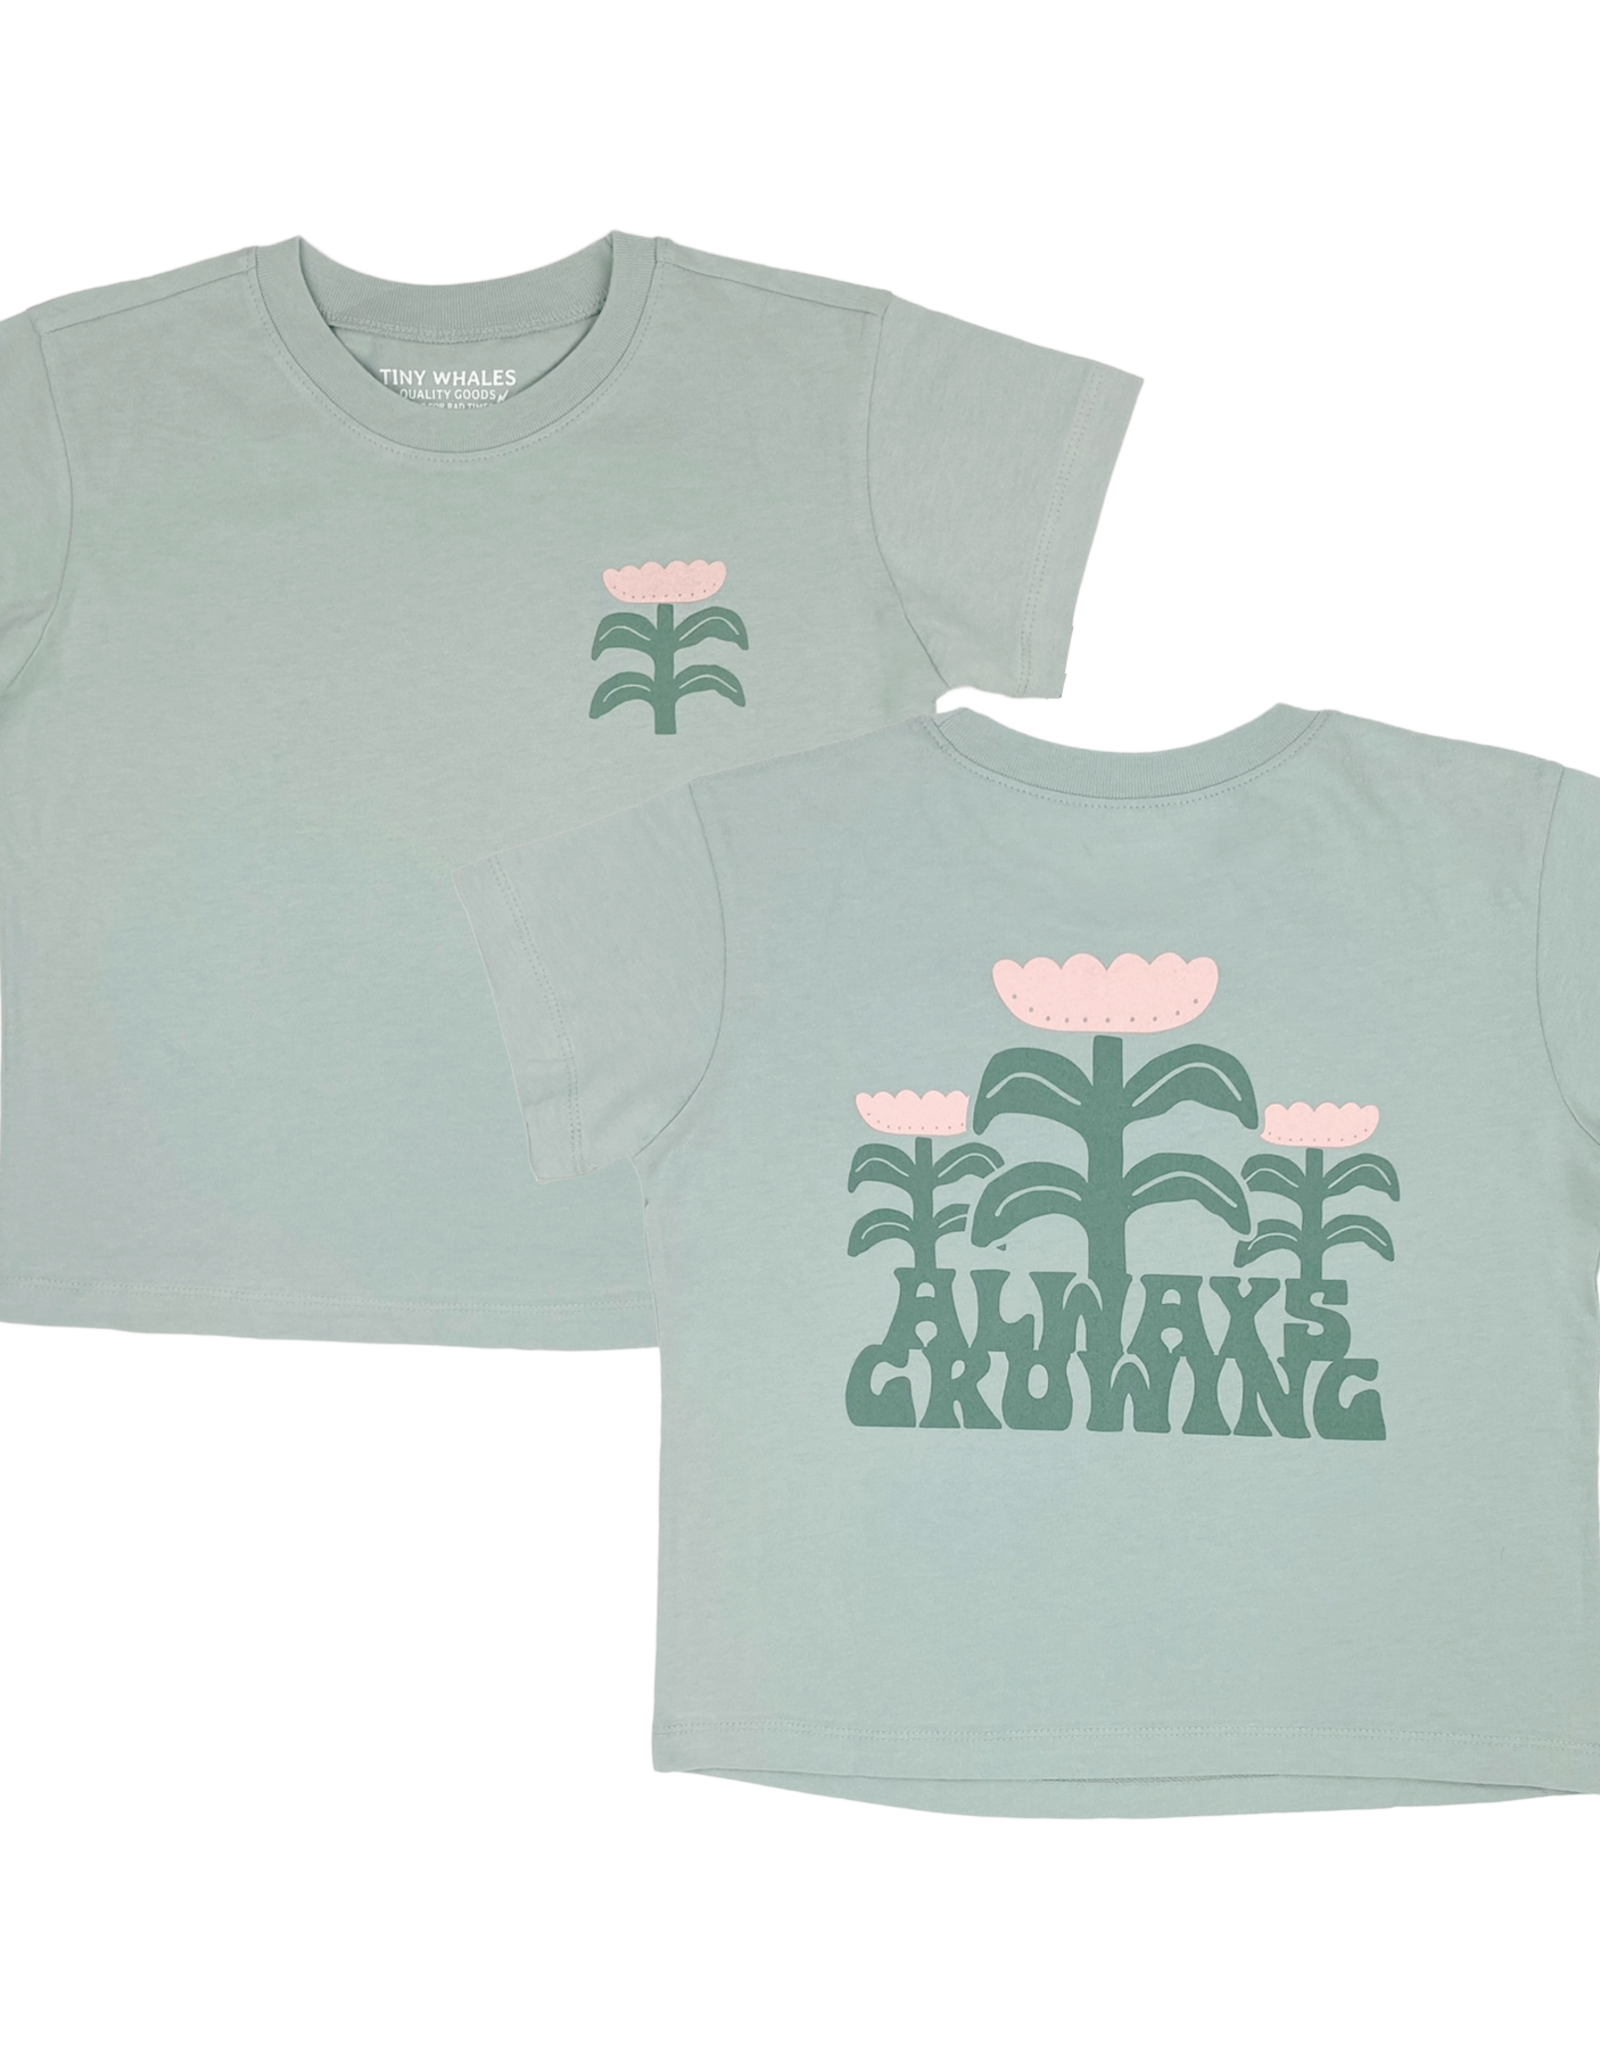 Tiny Whales always growing boxy tee